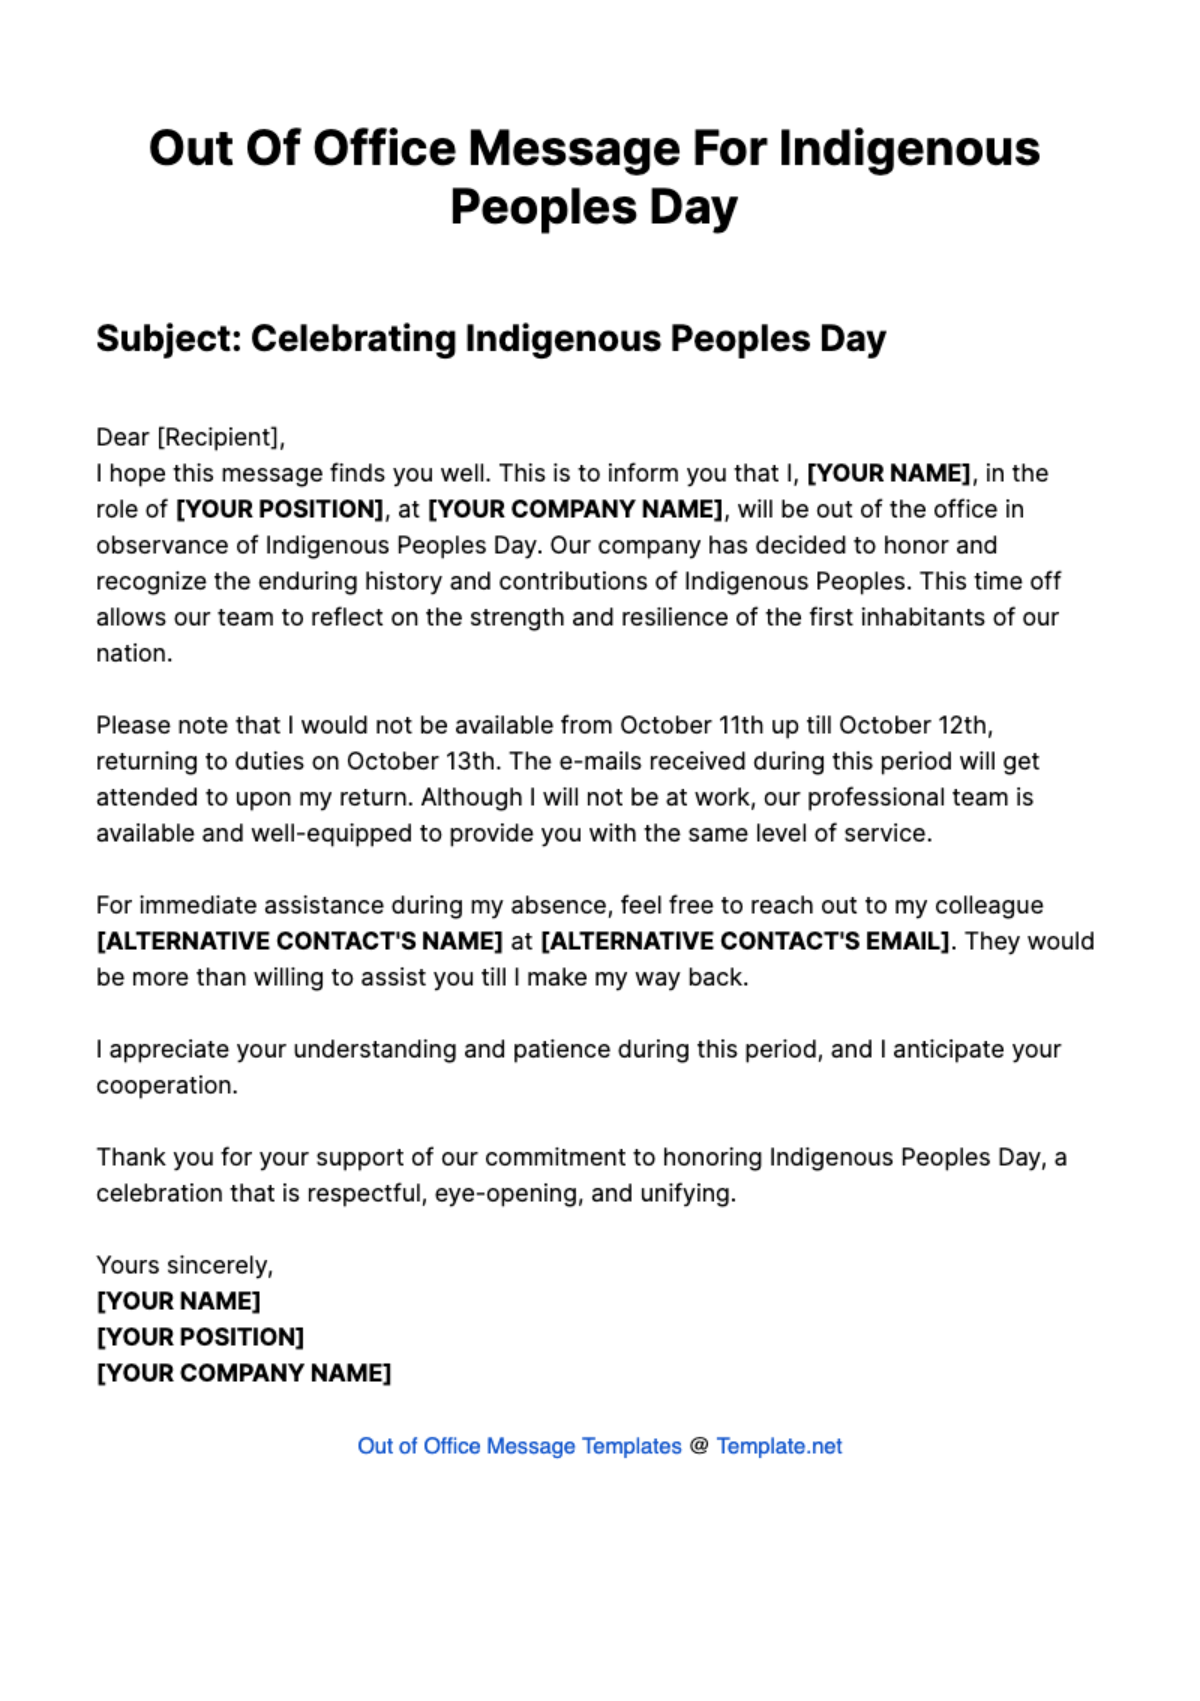 Free Out Of Office Message For Indigenous Peoples Day Template